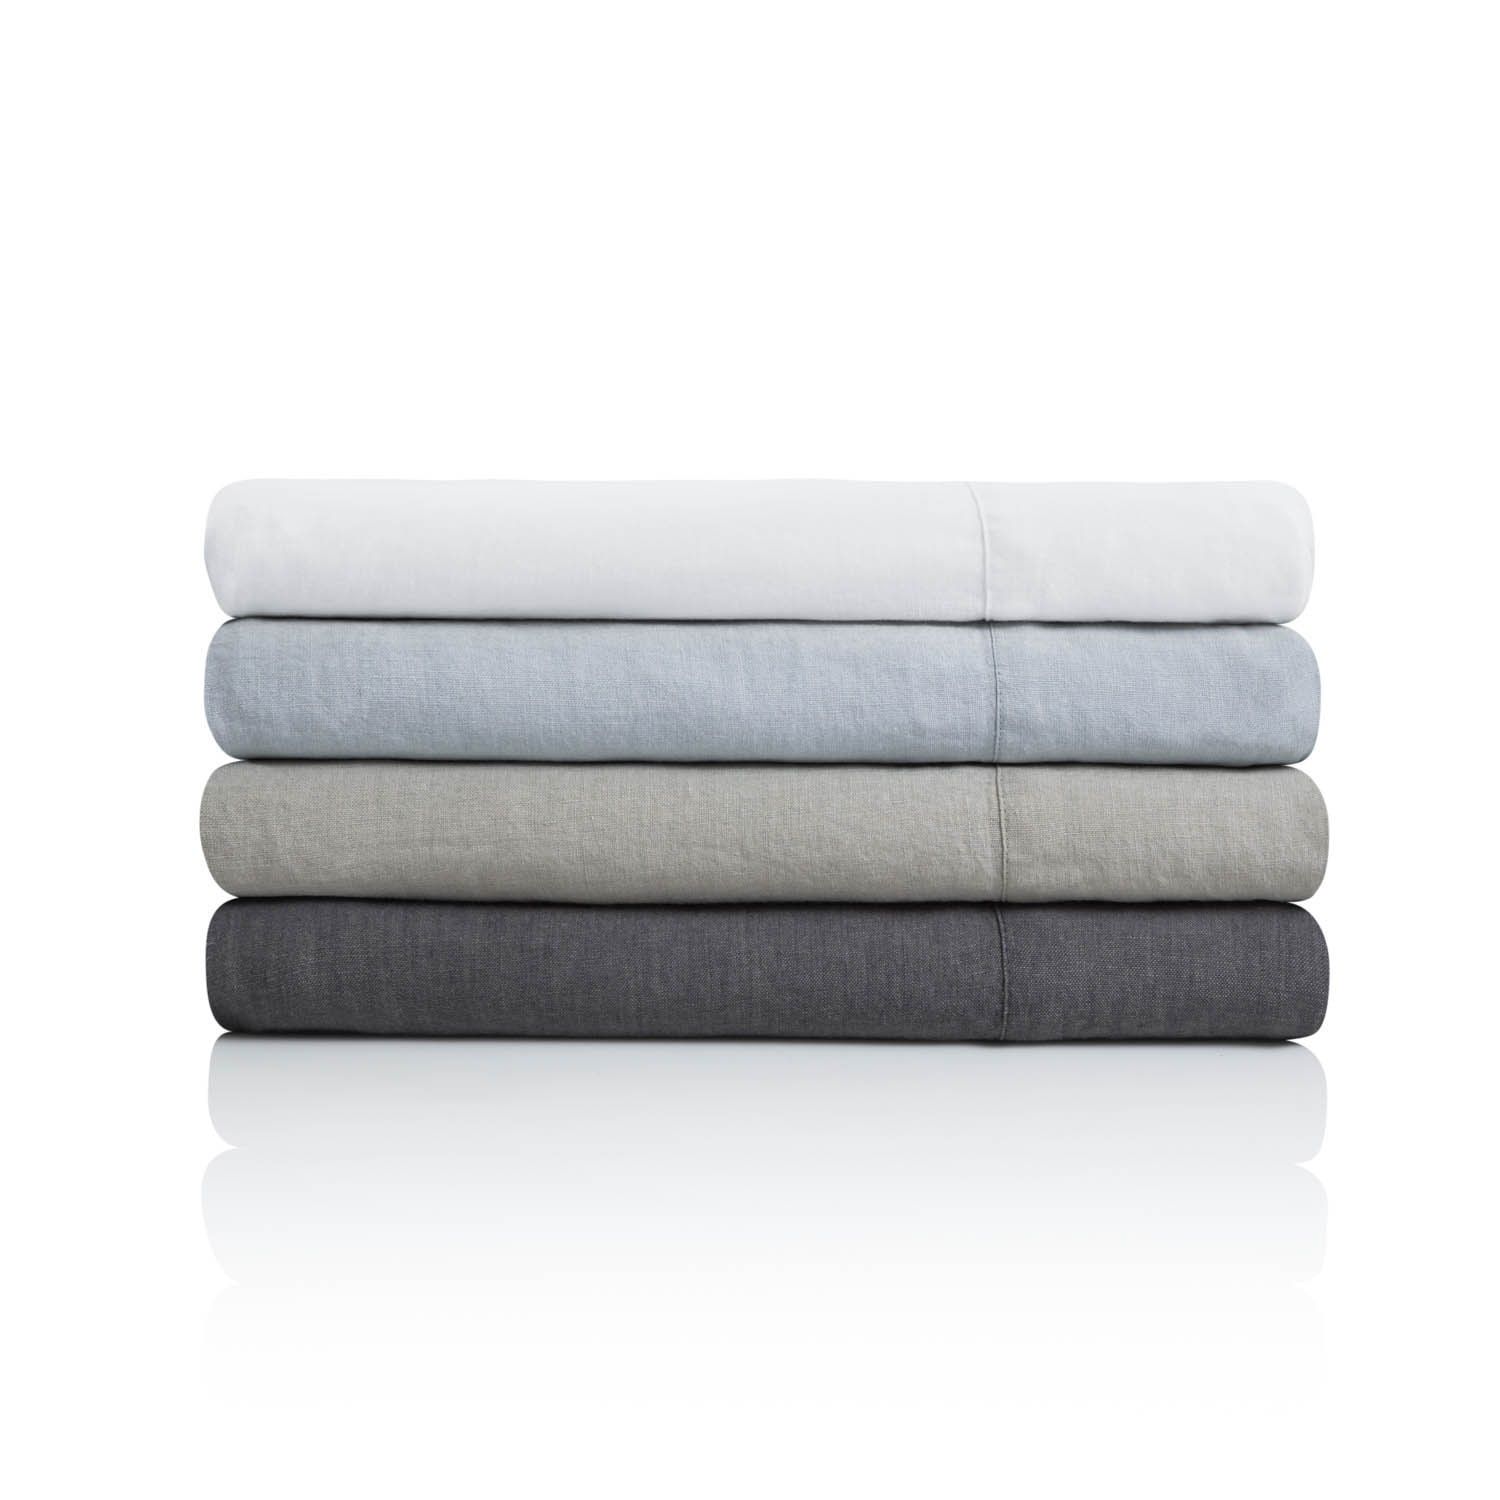 Malouf Vintage Wash French Linen Duvet with Matching Pillow Shams | Bed Bath & Beyond